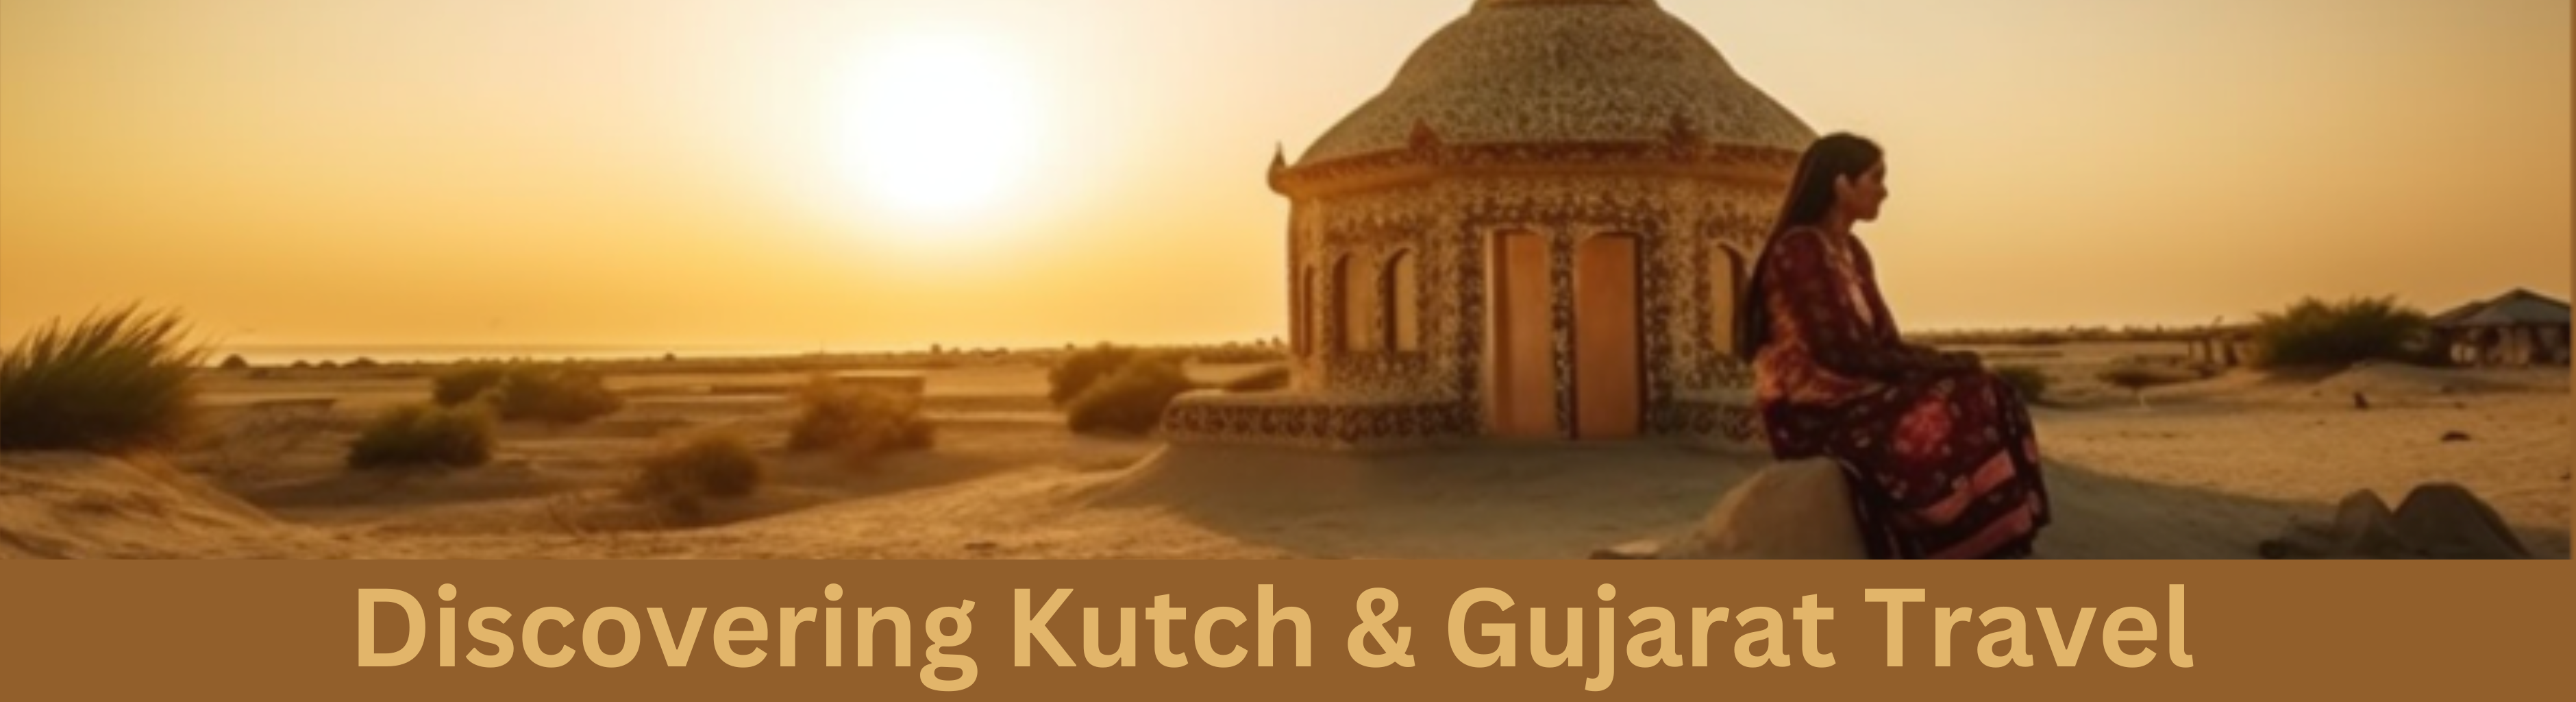 Discovering Kutch